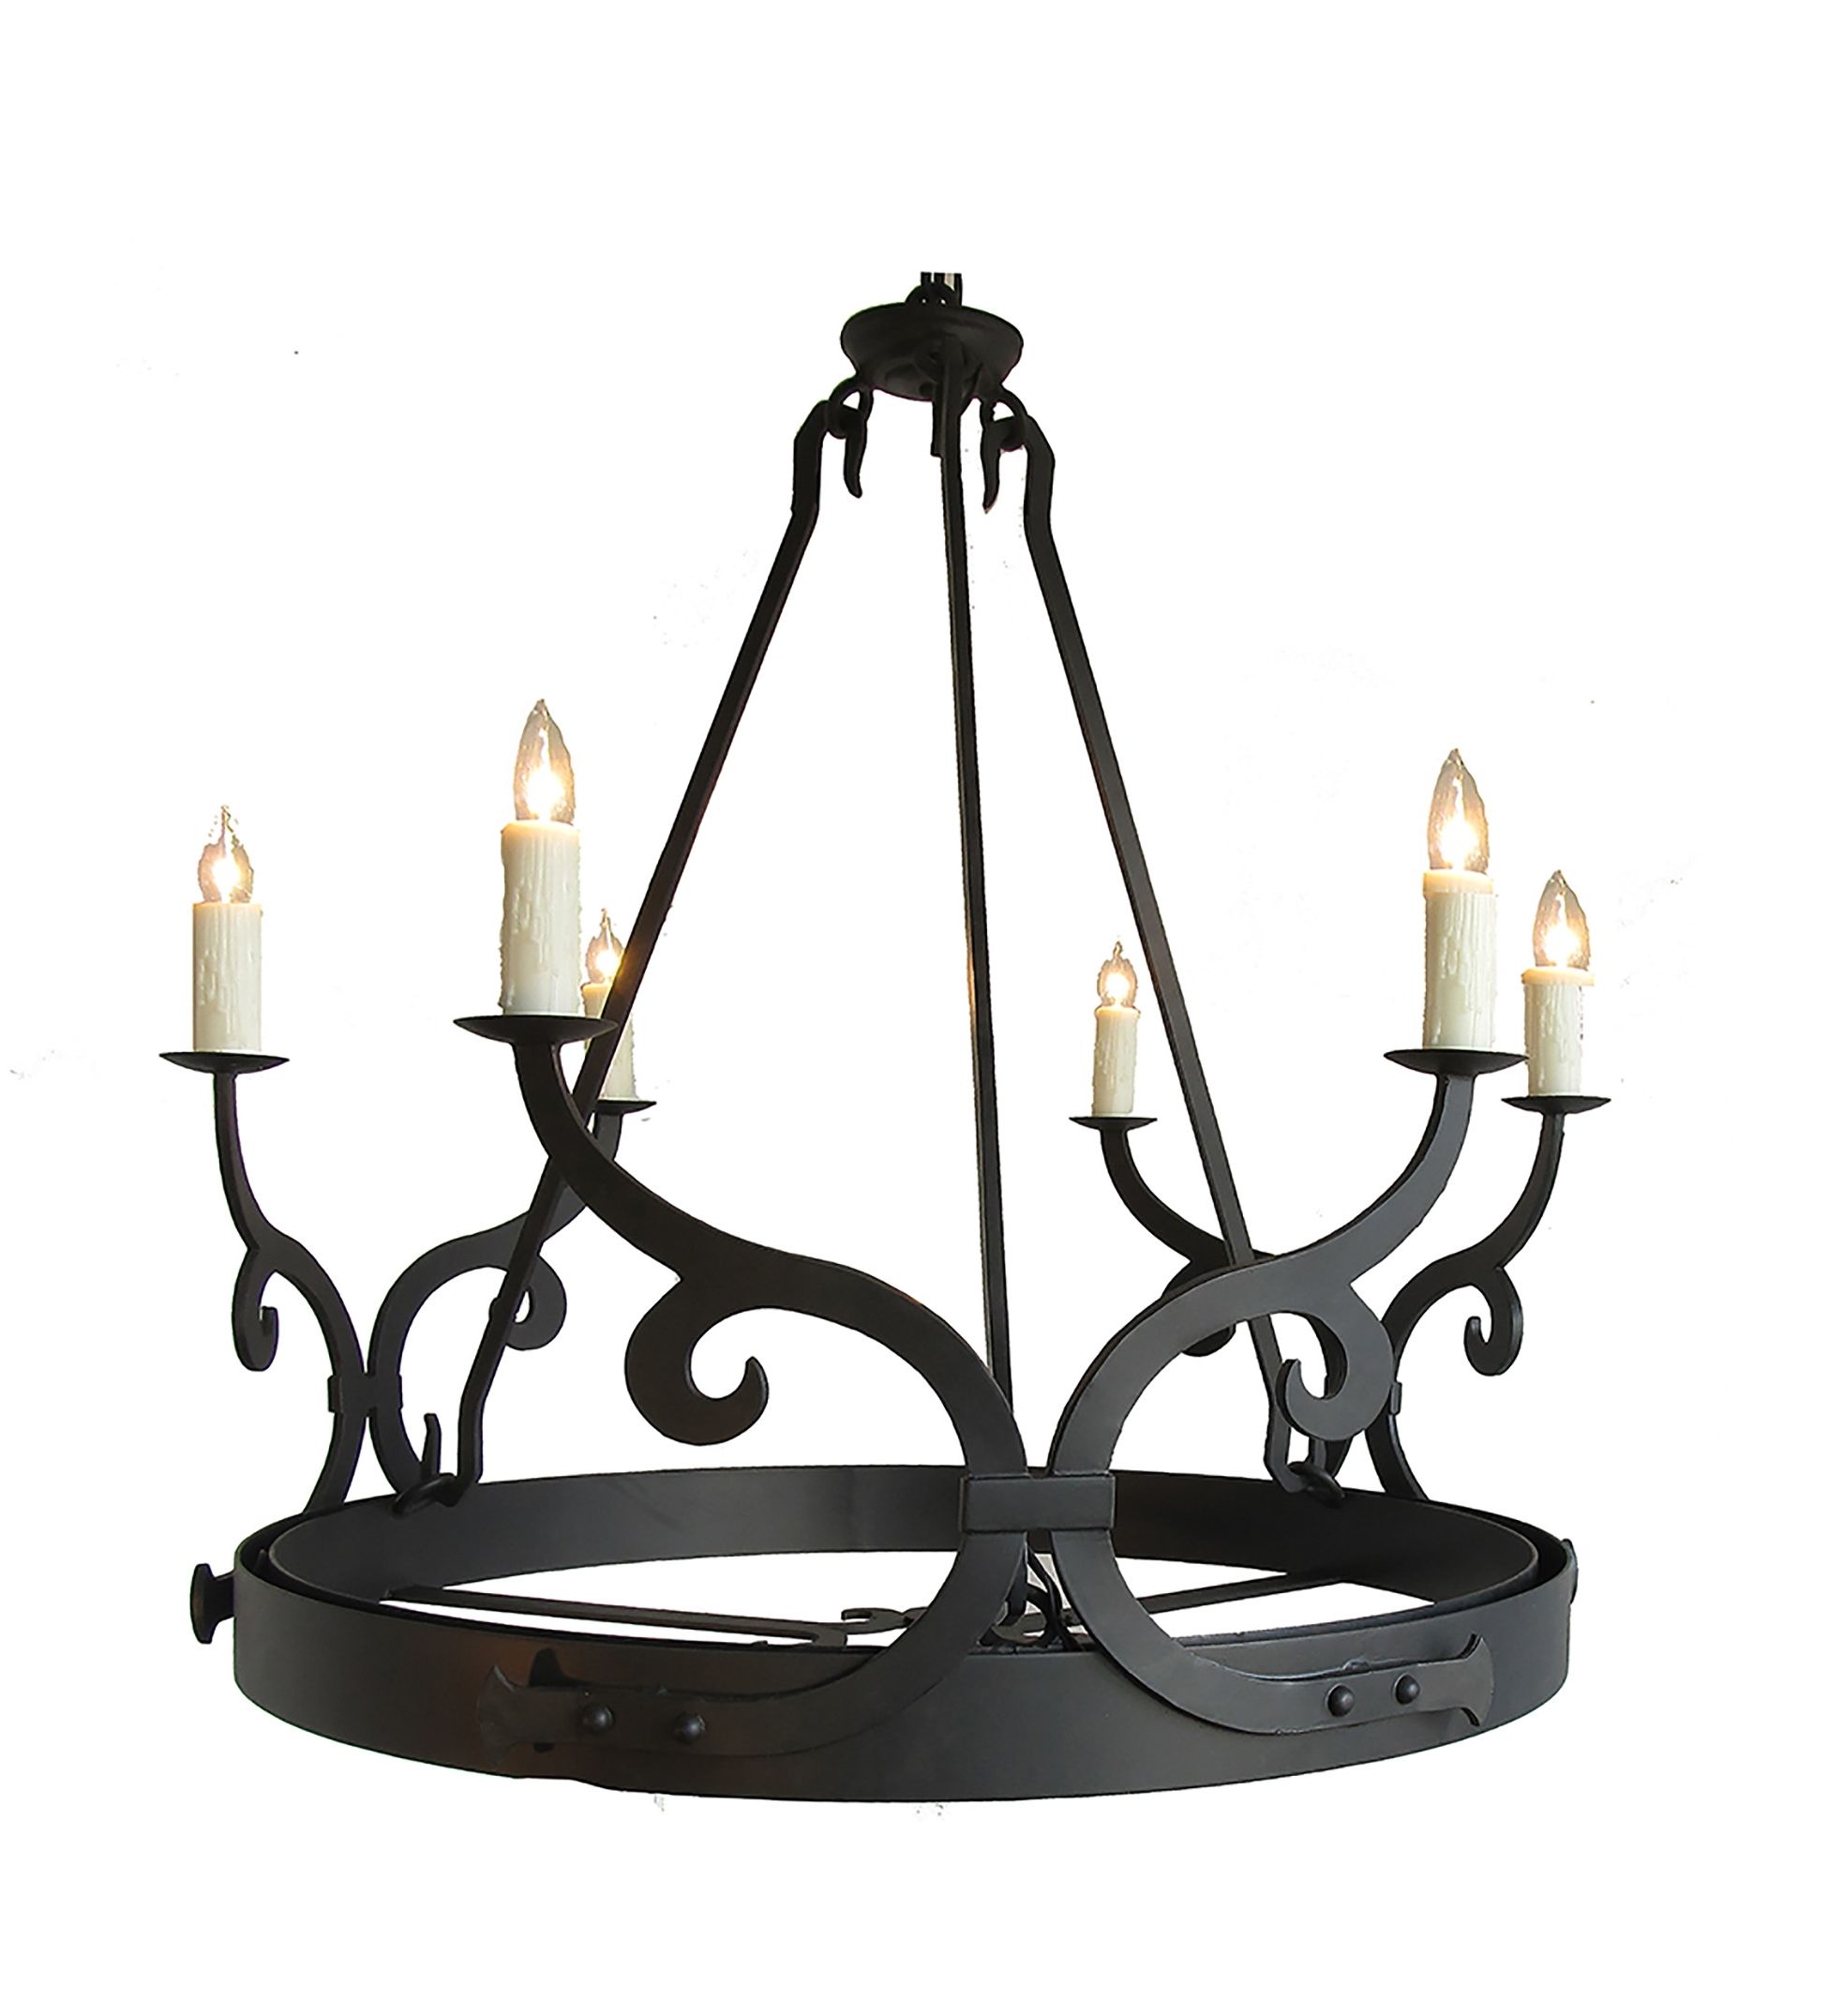 Important Aspects To Consider On Wrought Iron Candle Chandelier Inside Widely Used Iron Chandelier (View 19 of 20)